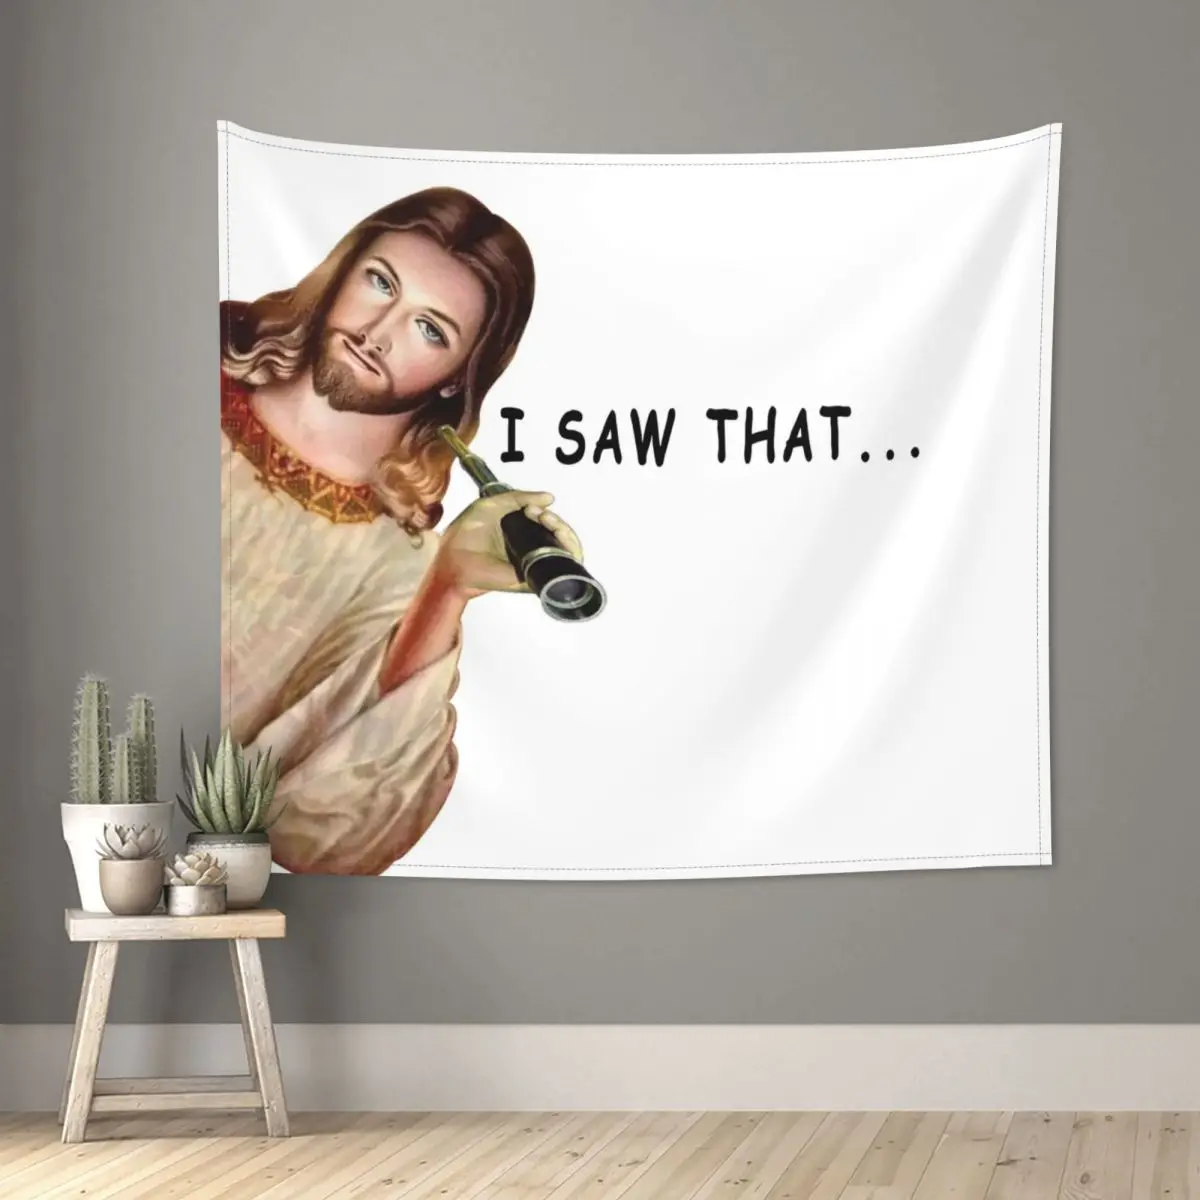 

Jesus Christ I Saw That Tapestry Hippie Polyester Wall Hanging Meme Room Decor Table Cover Retro Tapestries